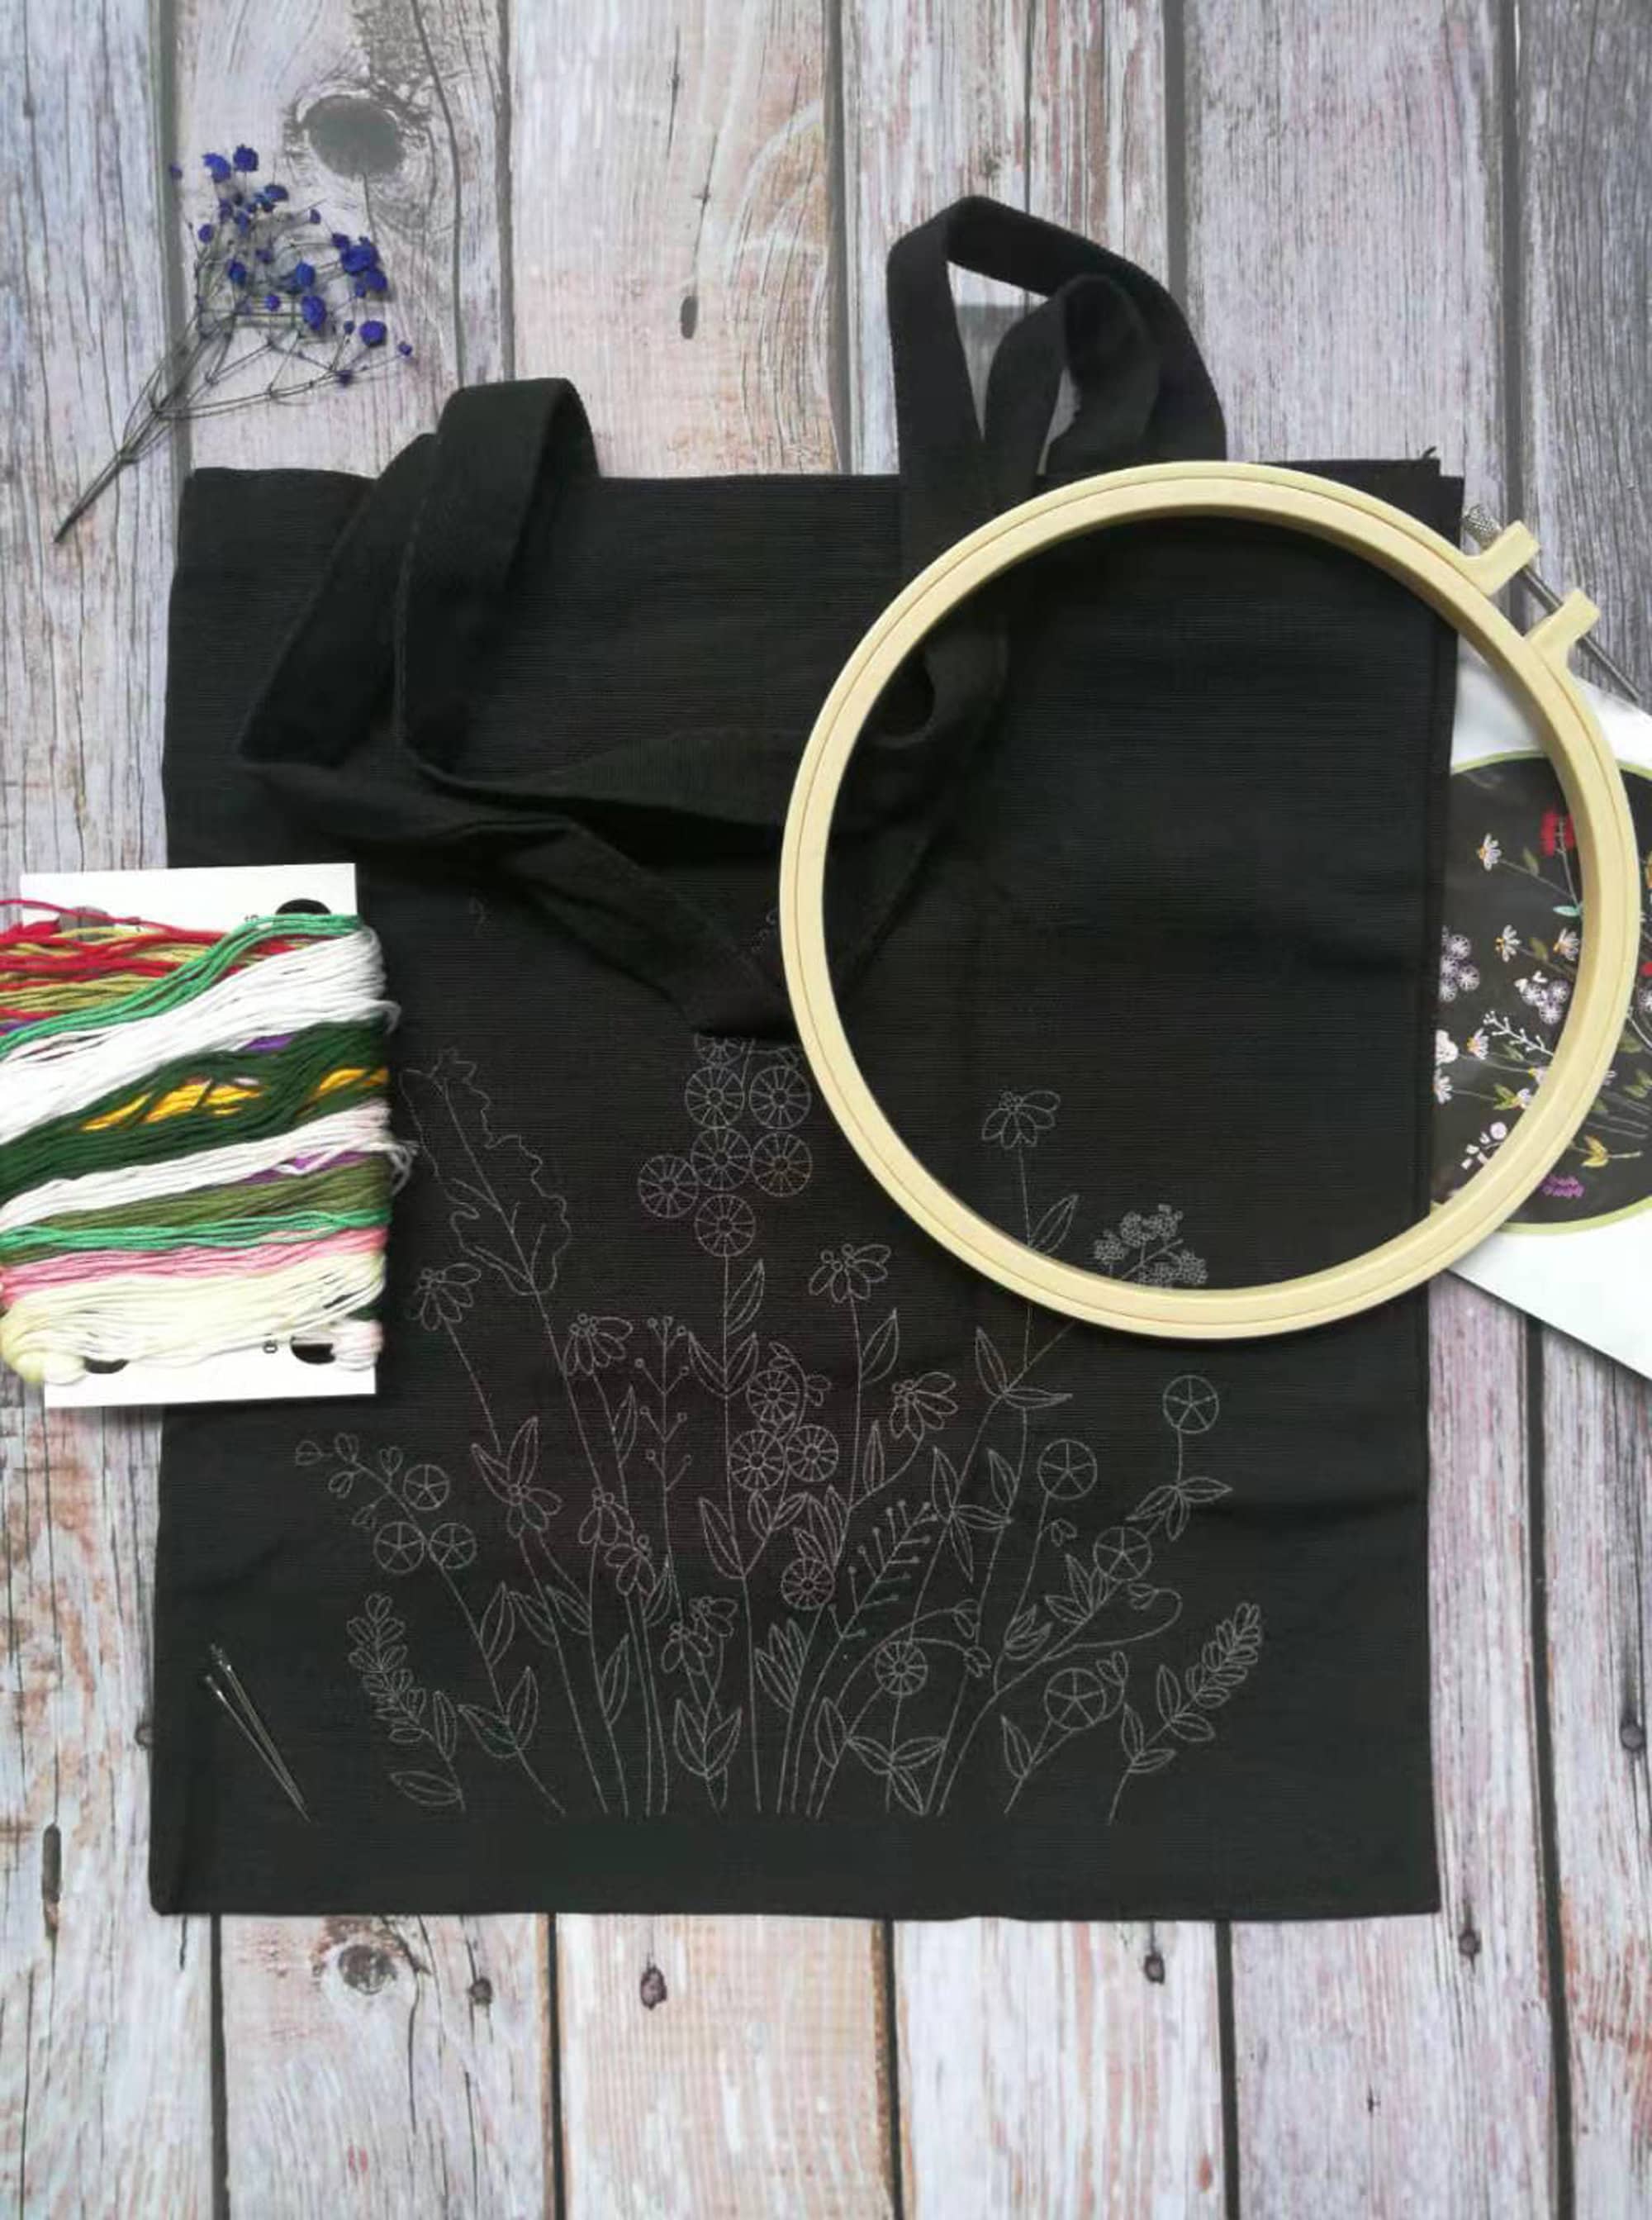 Embroidery Kit Canvas Tote Bag with Patterns for Beginners, Personalized  Canvas Bag Kits, Bamboo Embroidery Hoop, English Instruction for DIY Crafts